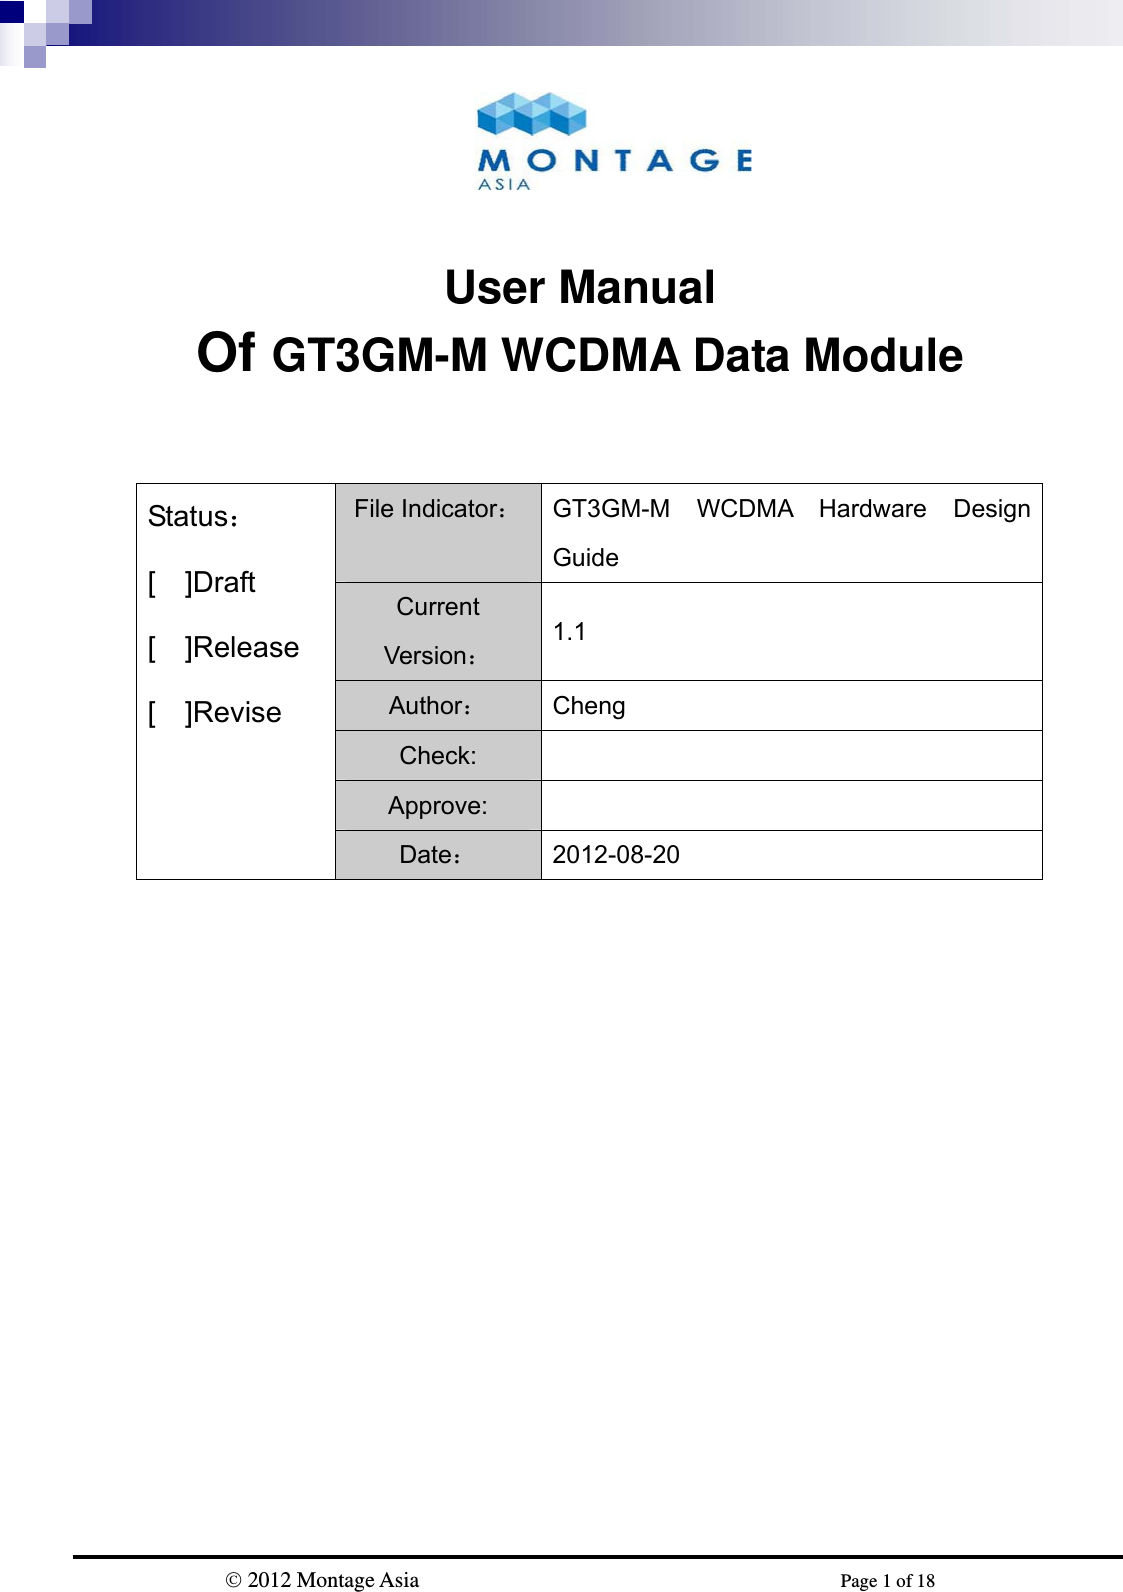                           2012 Montage Asia                                             Page 1 of 18    User Manual Of GT3GM-M WCDMA Data Module           Status： [  ]Draft  [  ]Release [  ]Revise File Indicator： GT3GM-M WCDMA Hardware Design Guide Current Version： 1.1 Author： Cheng Check:  Approve:  Date： 2012-08-20 